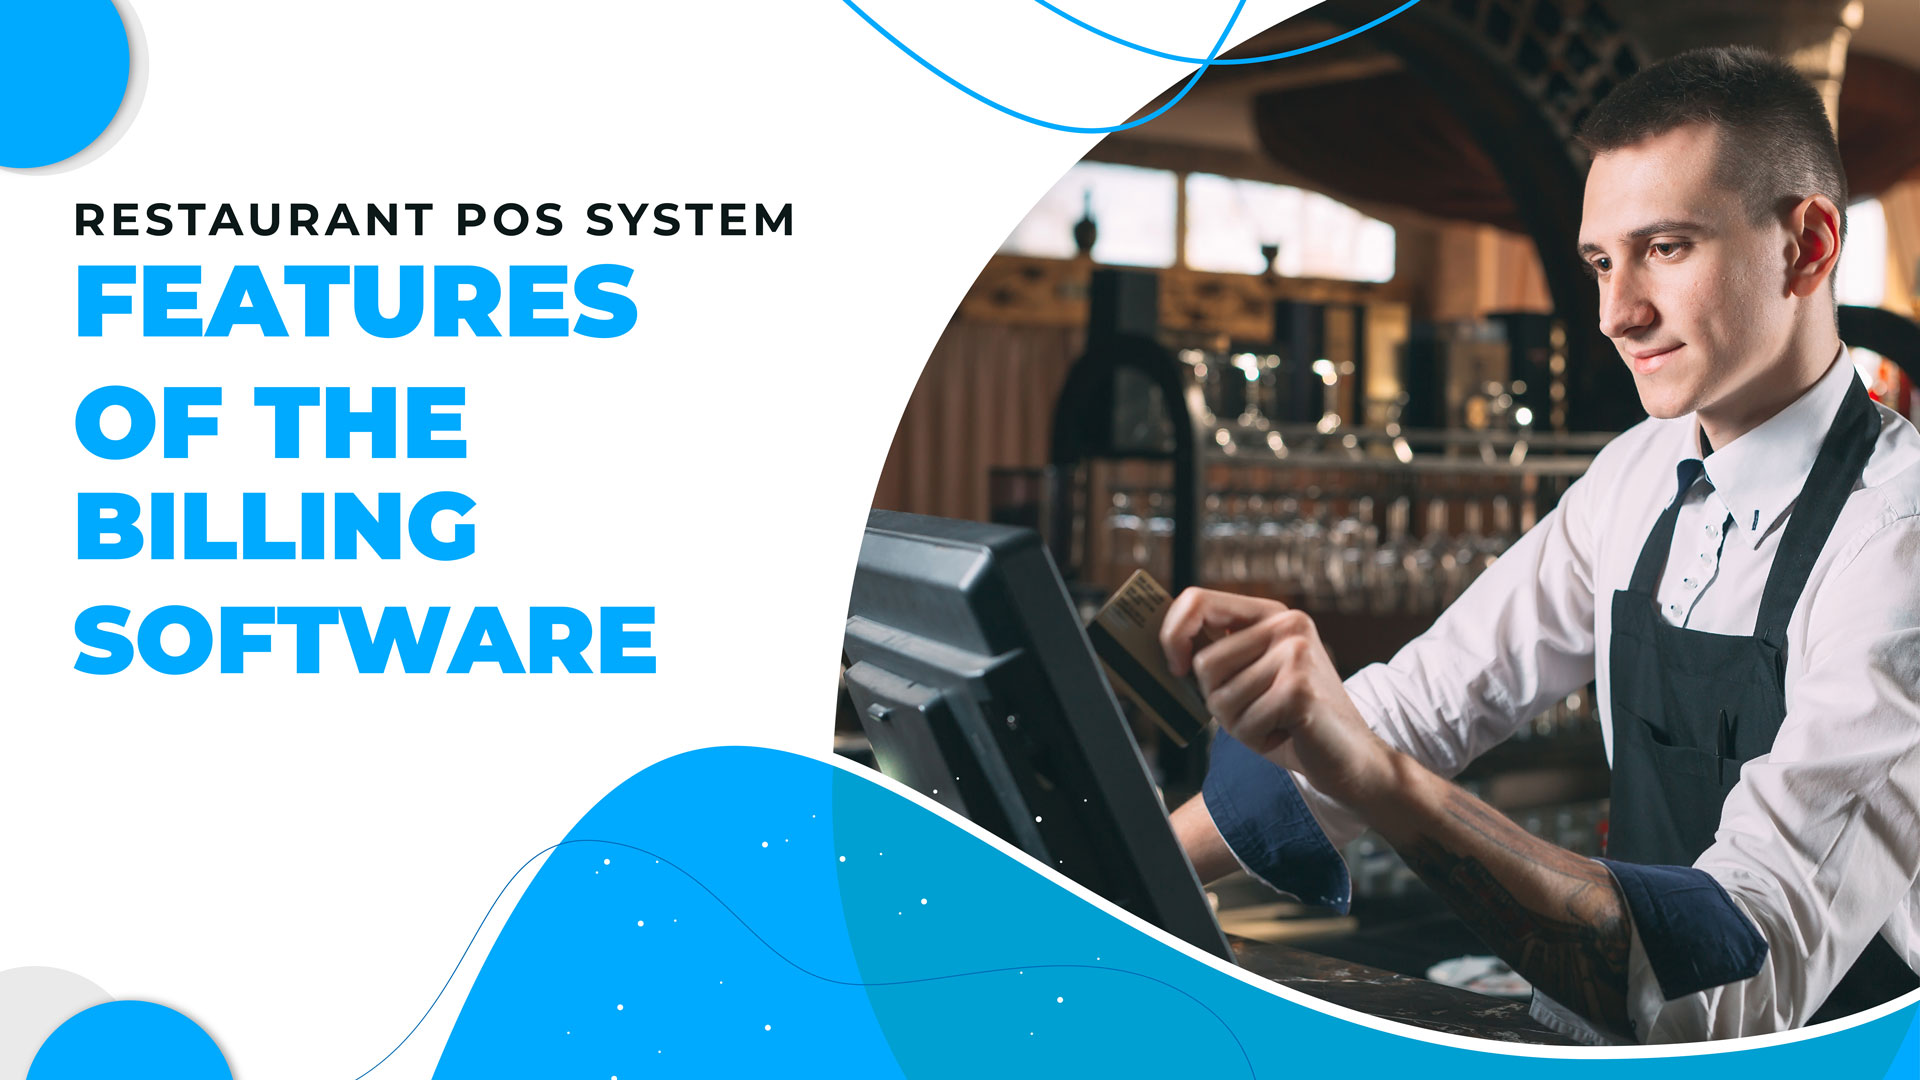 Restaurant POS System Features of the billing software 